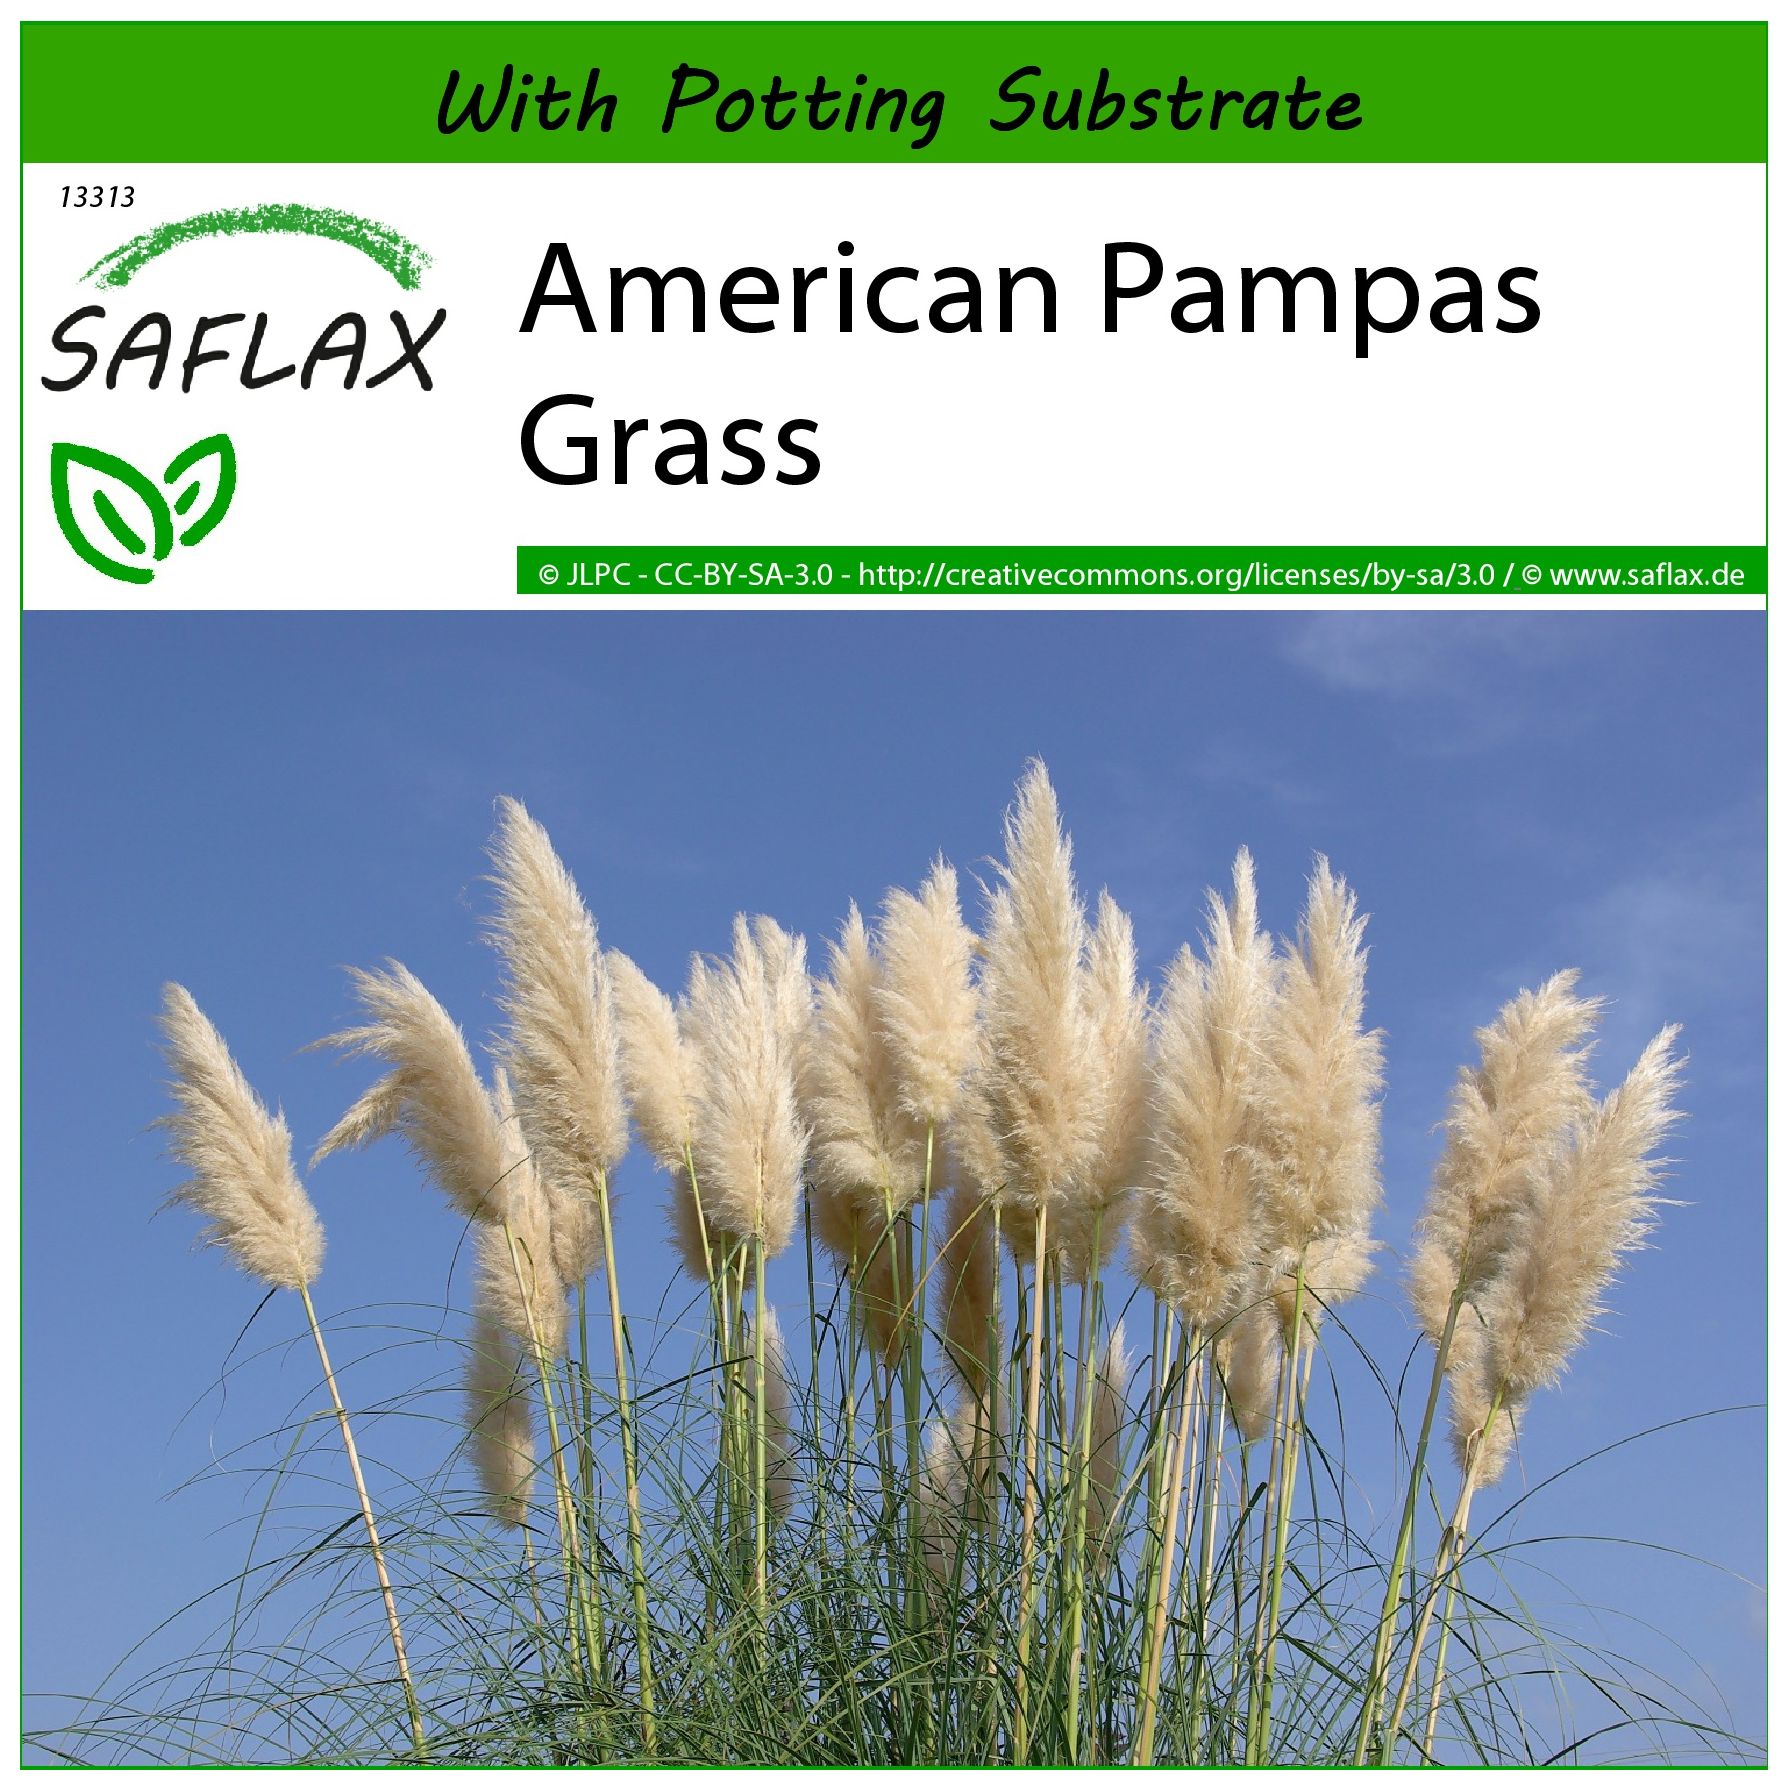 SAFLAX - American Pampas Grass - 200 seeds - With soil - Cortaderia